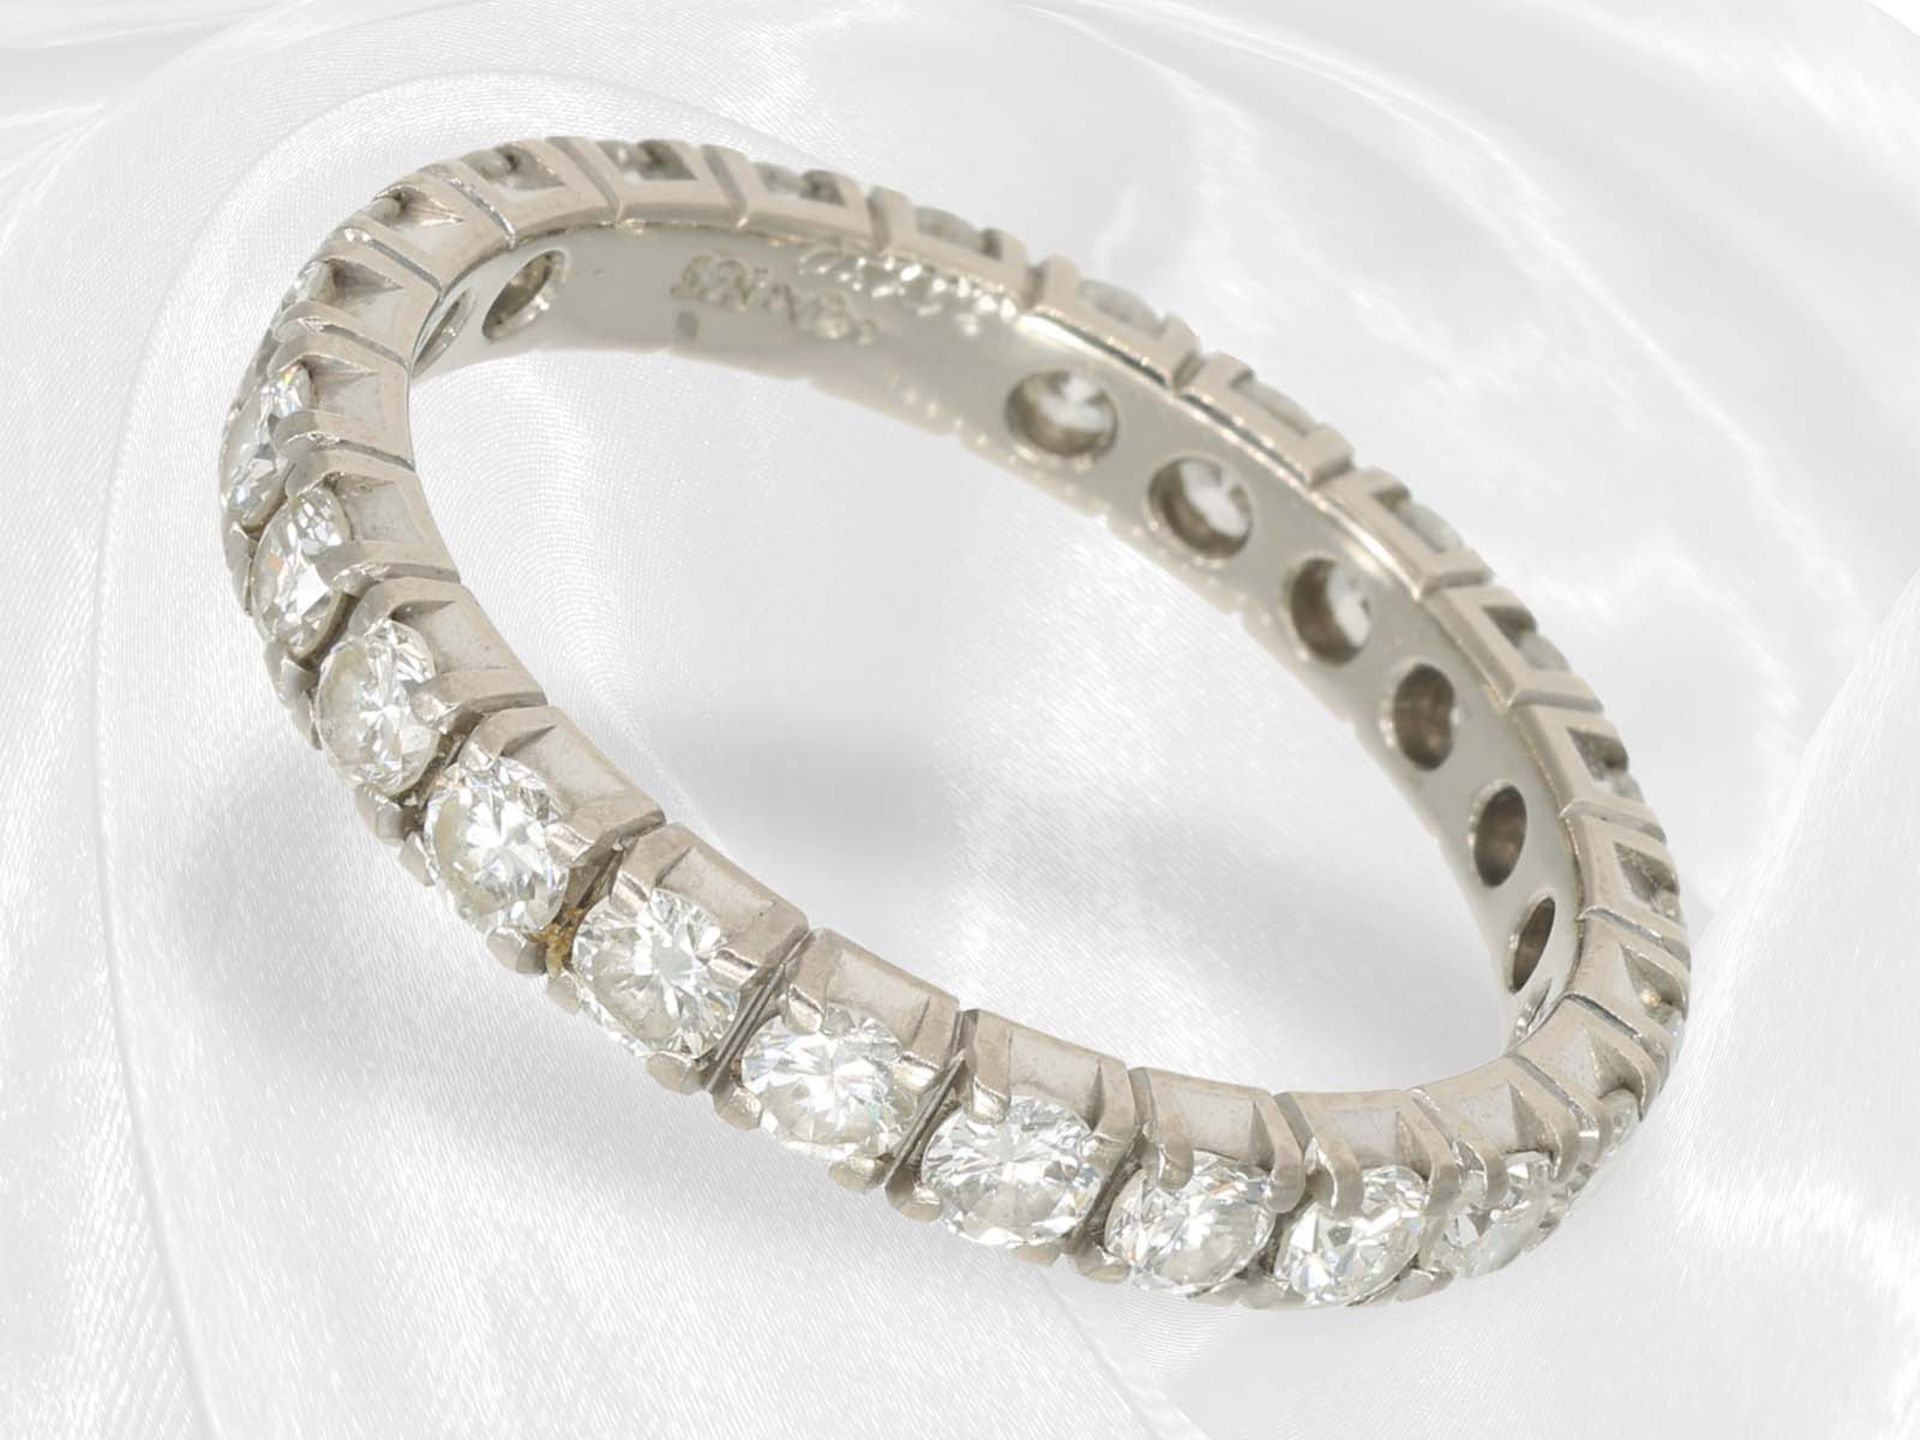 Ring: white gold, classic memoire/goldsmith ring with surrounding brilliant-cut diamonds, approx. 1.